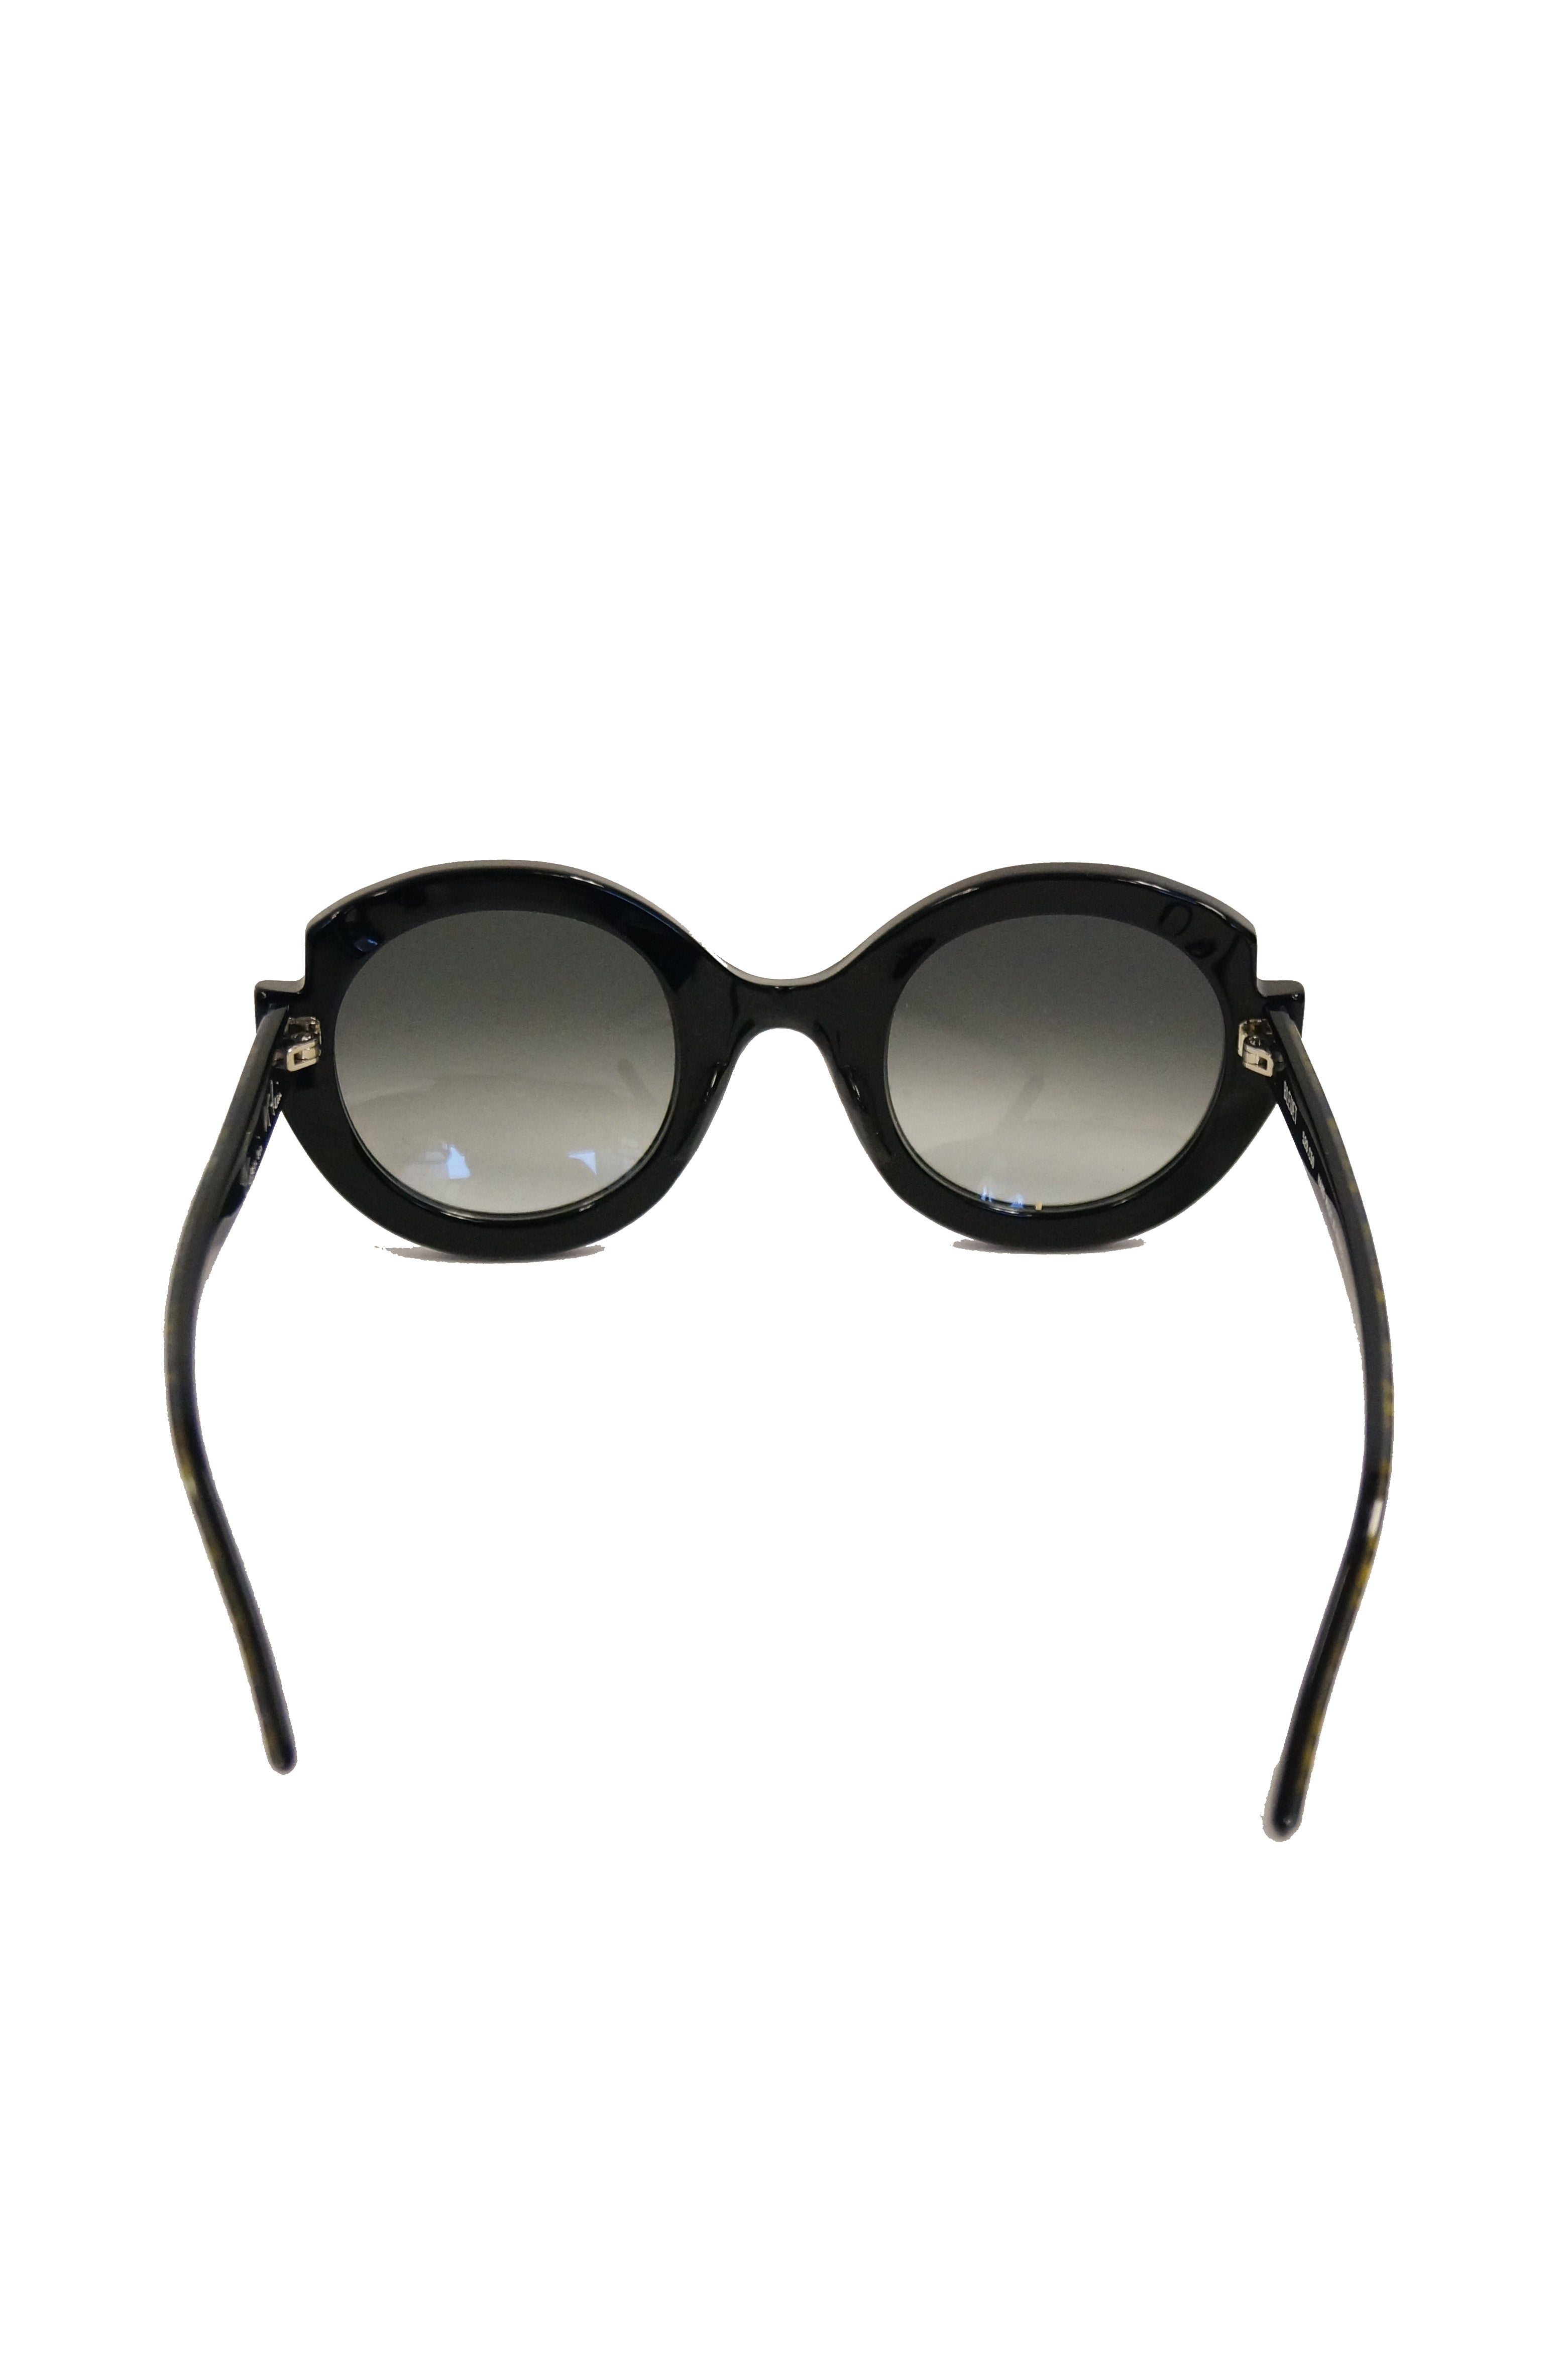 Francis Klein “Bleuet” Handmade and Handpainted Sunglasses Made In Fra ...